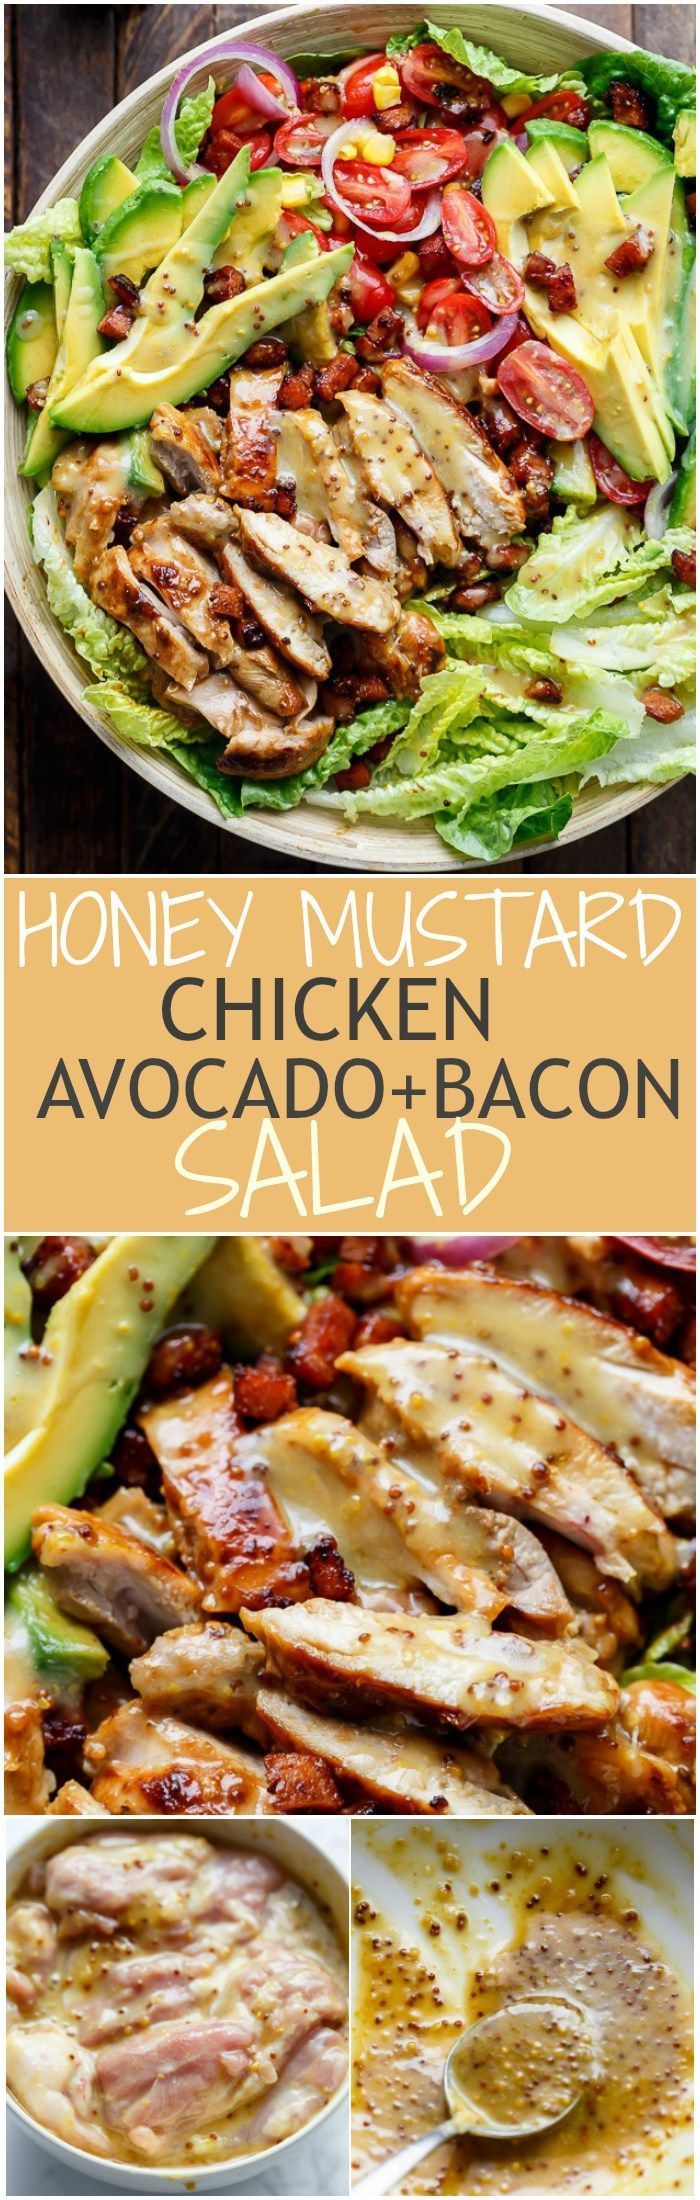 Honey Mustard Chicken, Avocado + Bacon Salad, with a crazy good Honey Mustard dressing withOUT mayonna